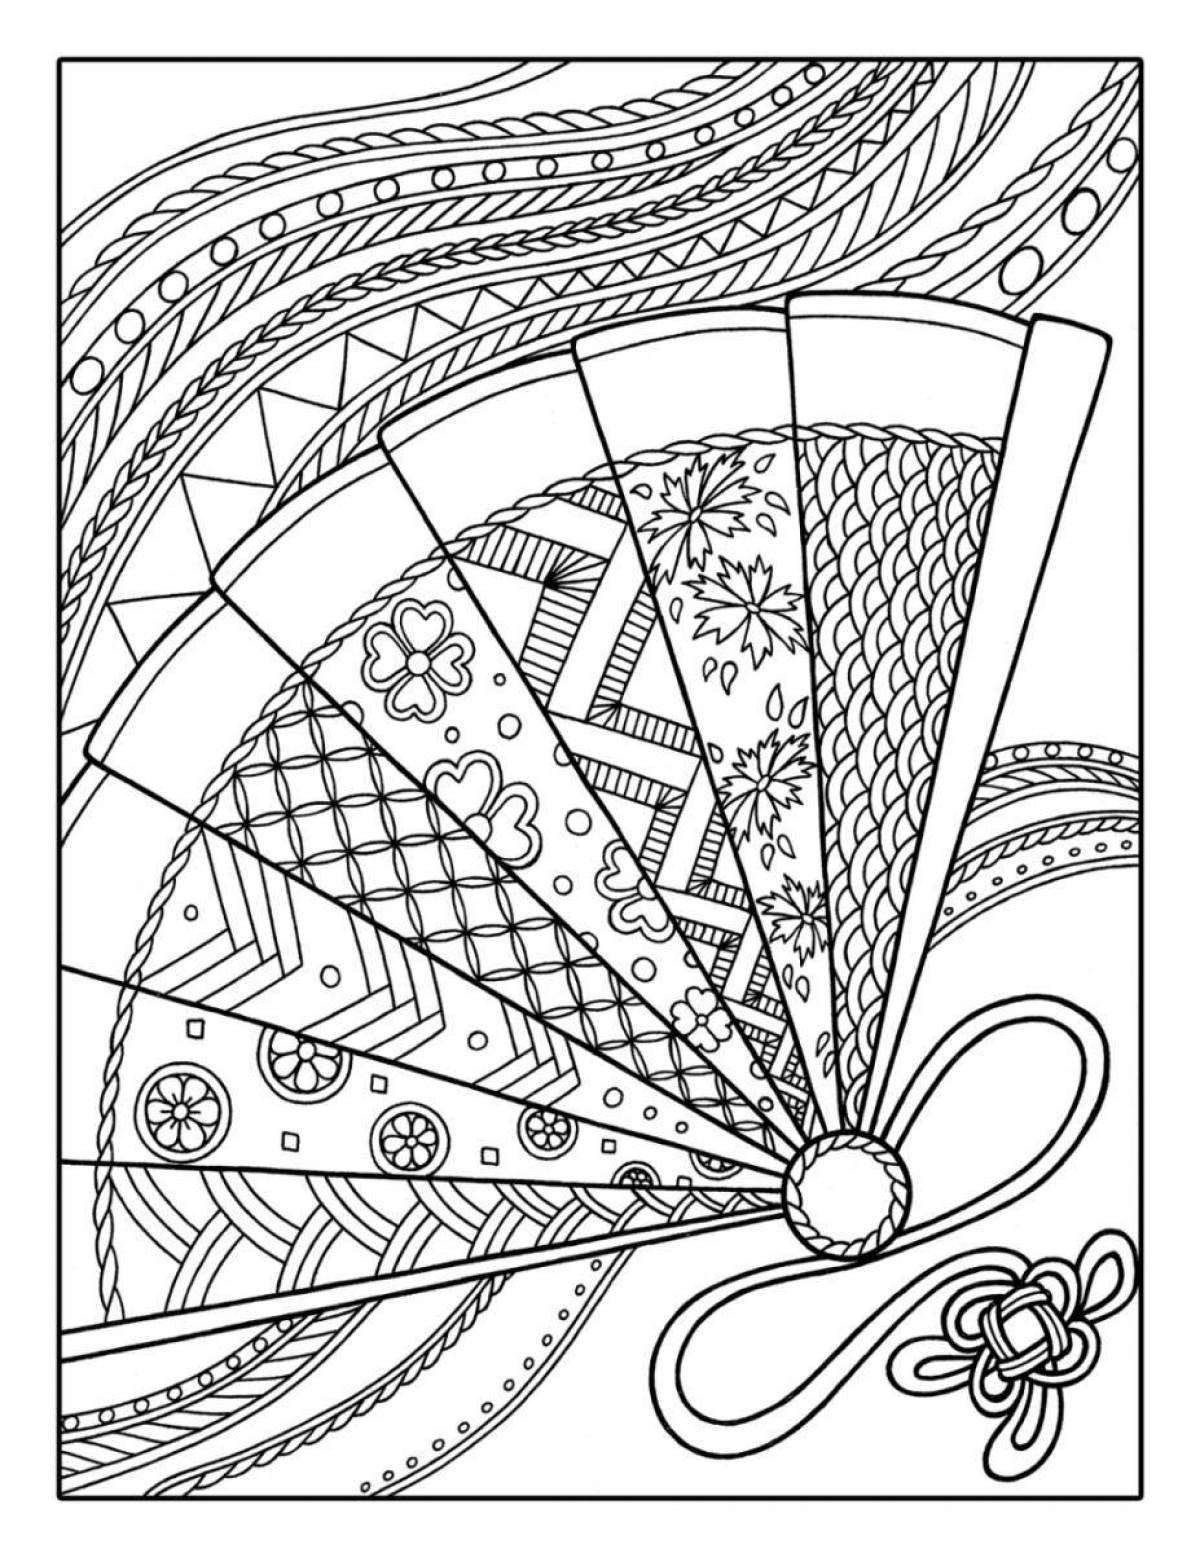 Awesome zendoodle coloring book